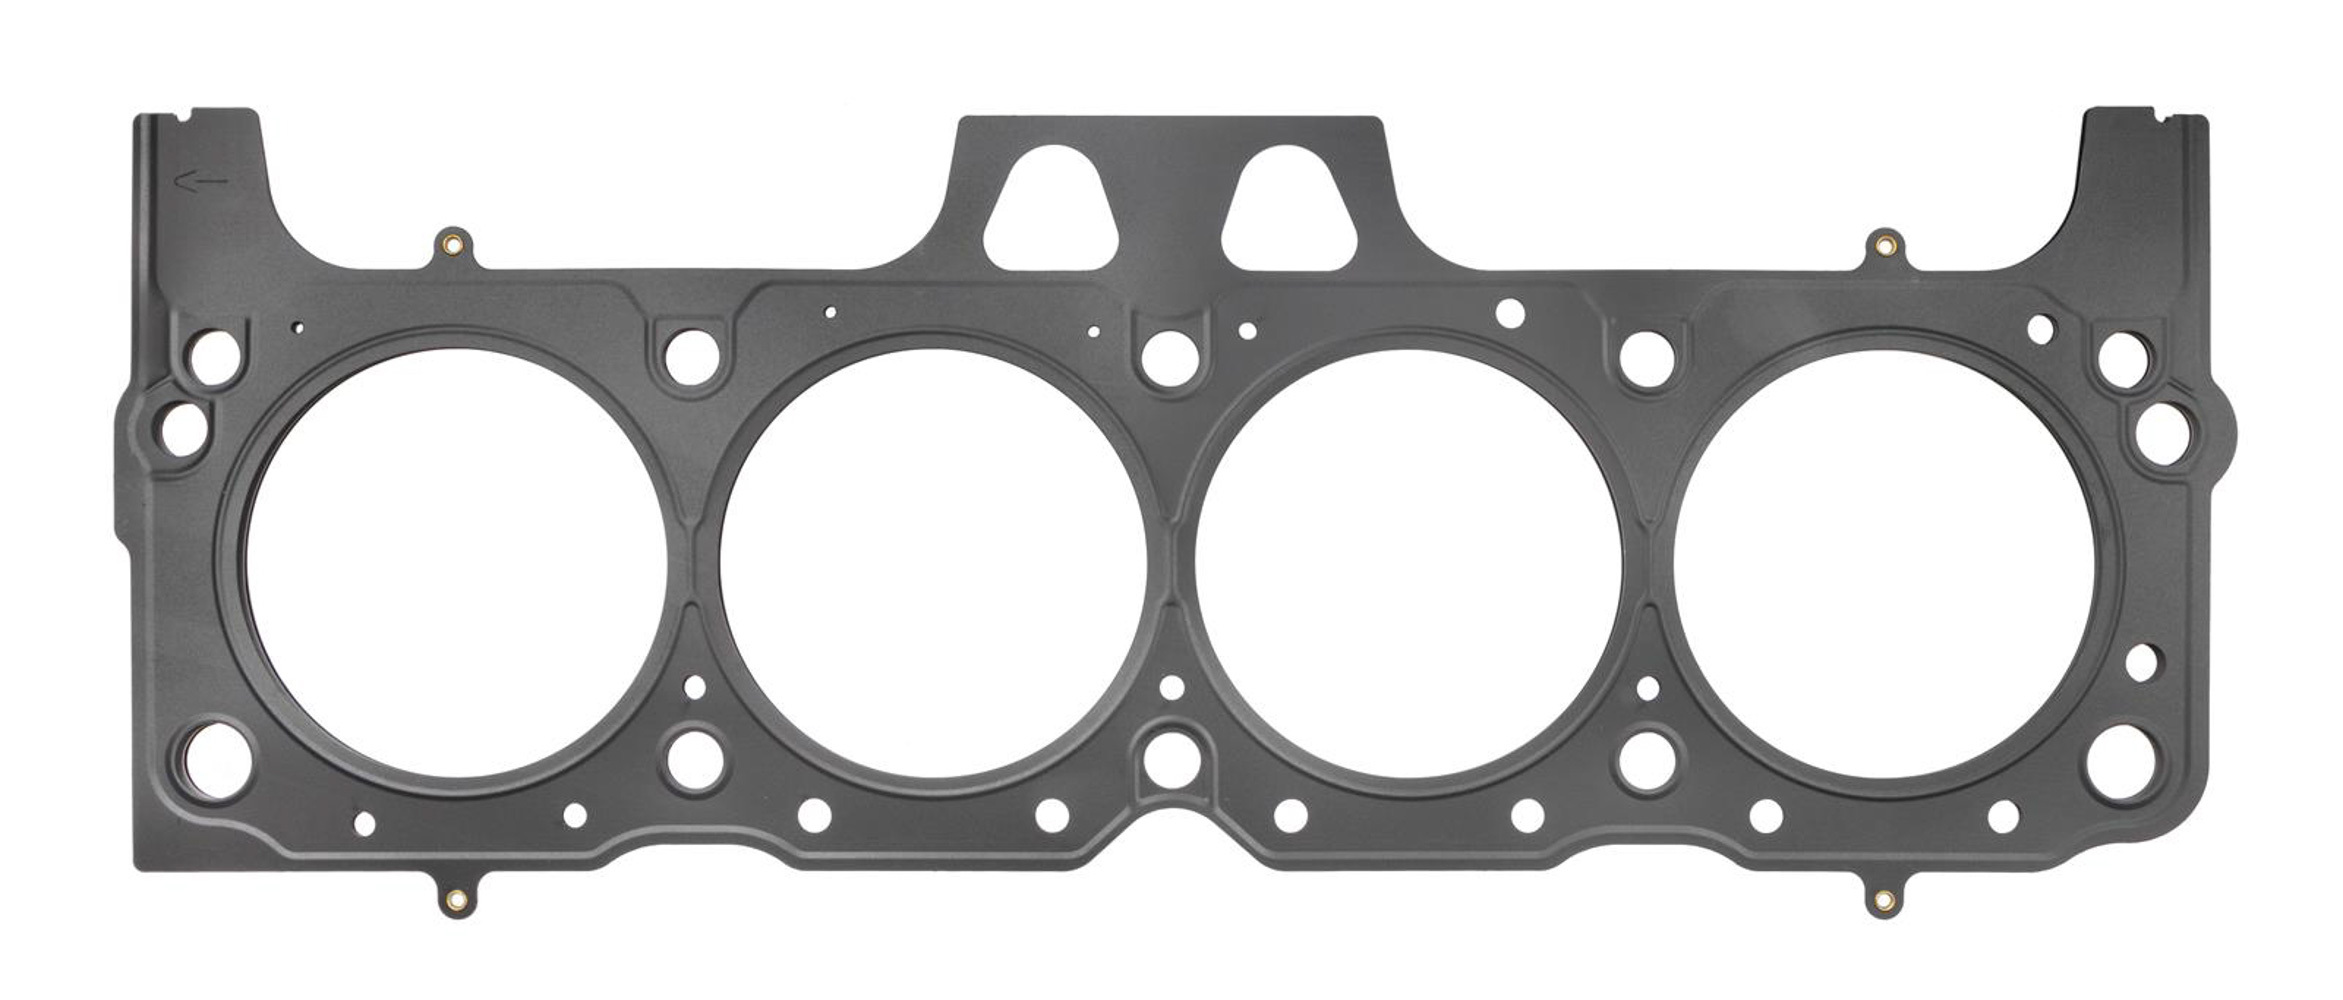 SCE Gaskets M354039 - Cylinder Head Gasket, MLS Spartan, 4.400 in Bore, 0.039 in Compression Thickness, Multi-Layer Steel, Big Block Ford, Each